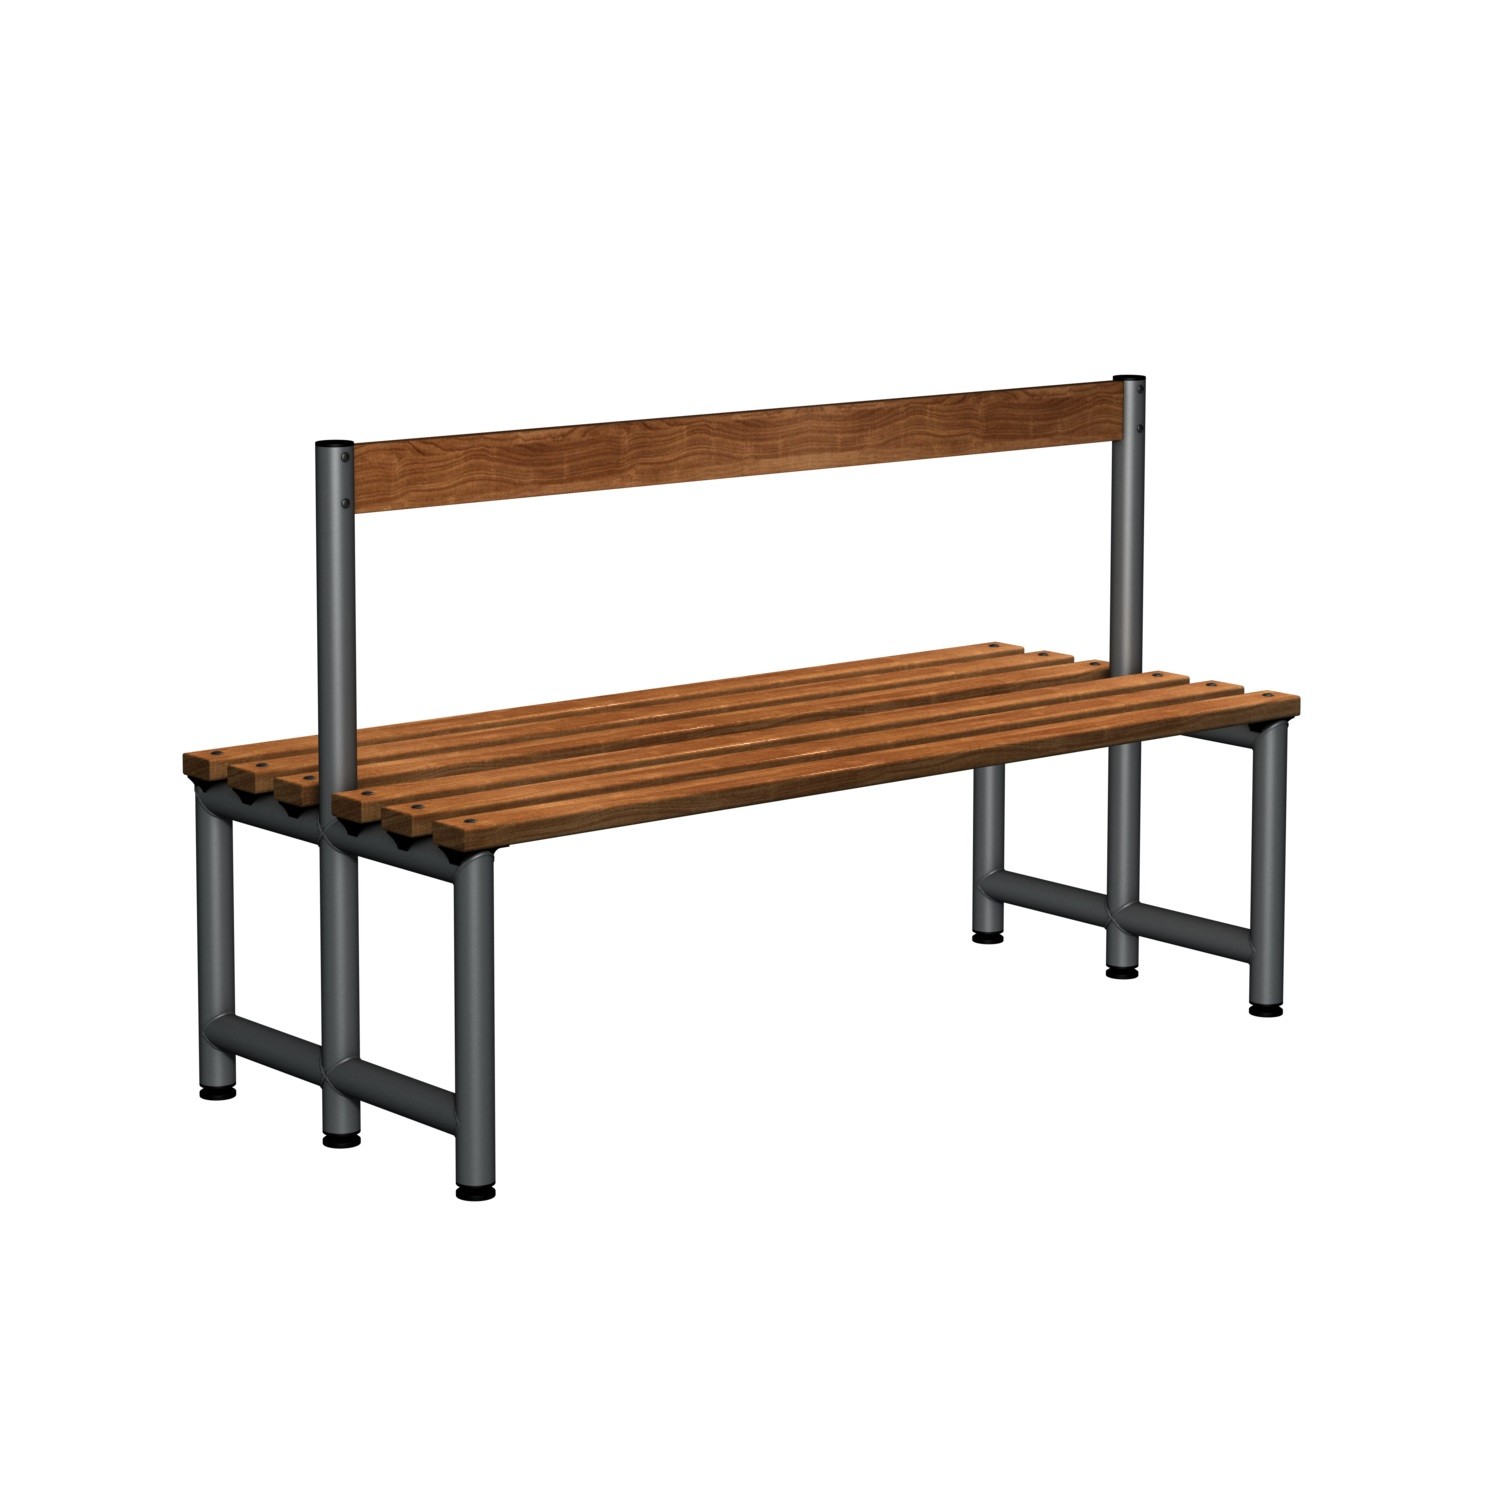 Double Sided Low Seat - Type C